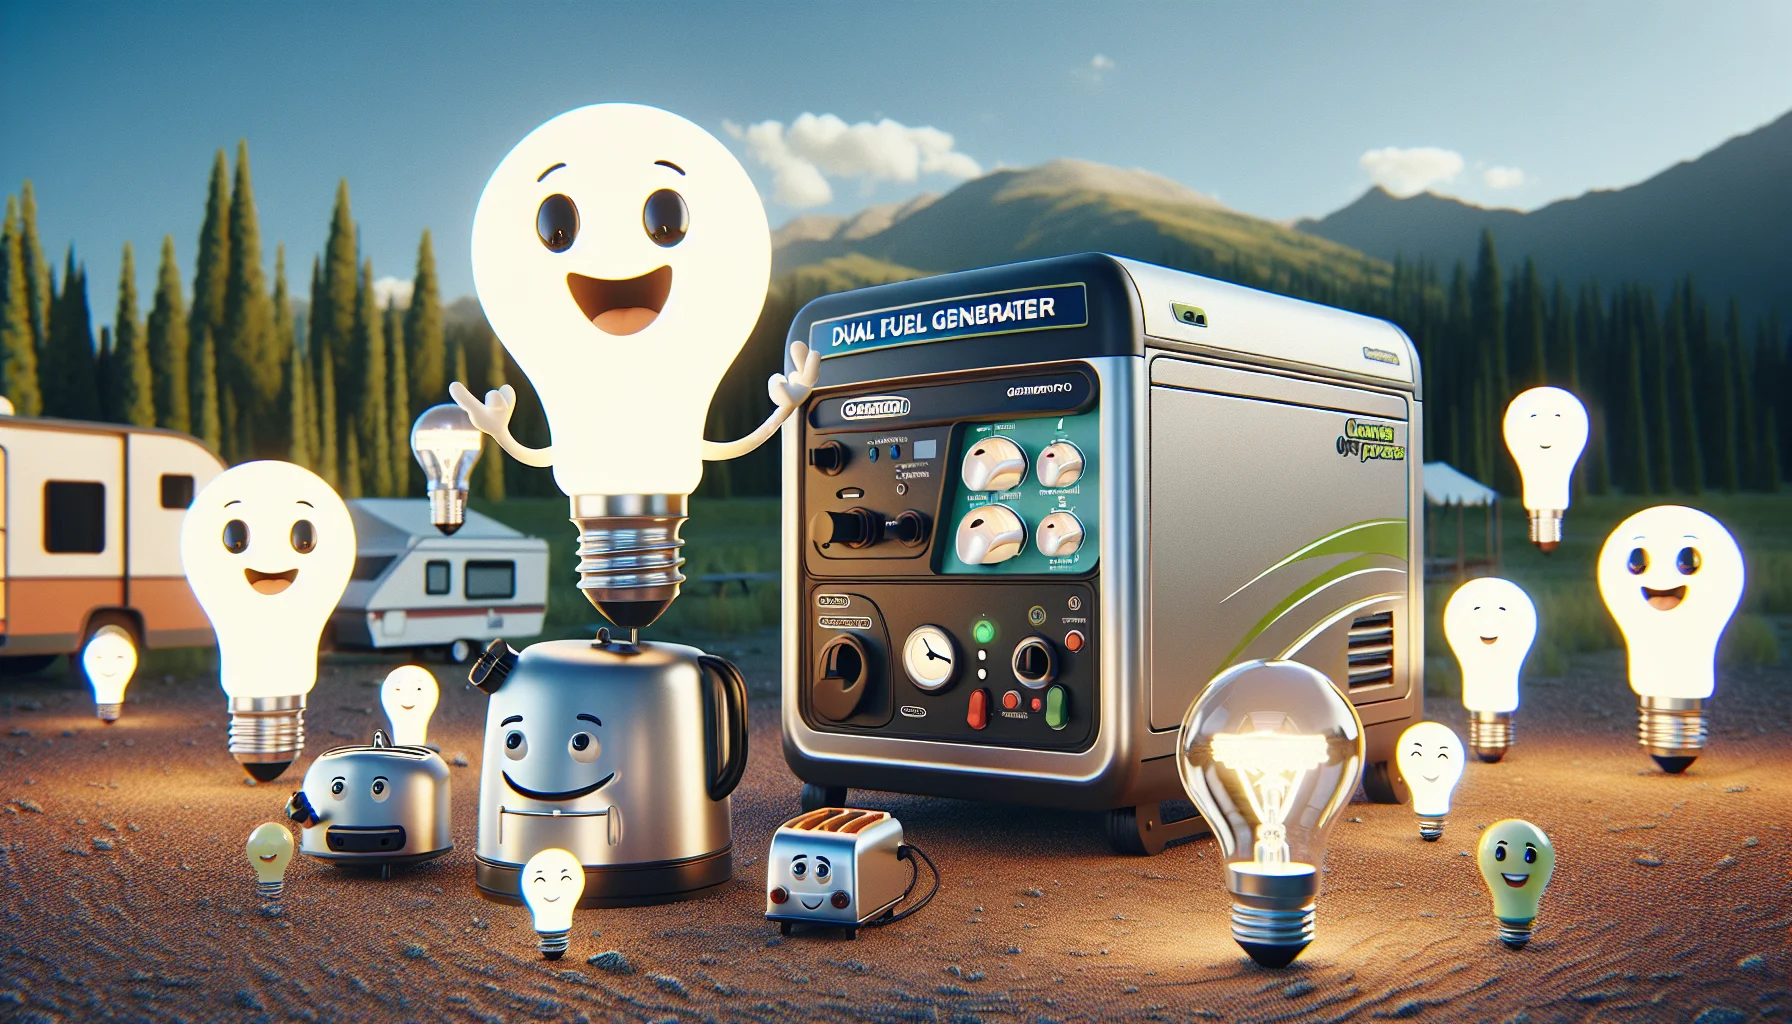 An image of a humorous setting with a dual fuel generator. The generator has a cheerful anthropomorphic face, seeming to suggest 'Come, generate power with me!'. Around it are cartoonish light bulbs that are glowing bright, making it appear as if they are dancing. On the ground, there are smaller anthropomorphic appliances like a toaster and a blender who are also excited, as if in a party. The backdrop is a scenic outdoors, maybe a campsite or an RV park, with distant trees and mountains showing the potential for off-grid electricity generation.